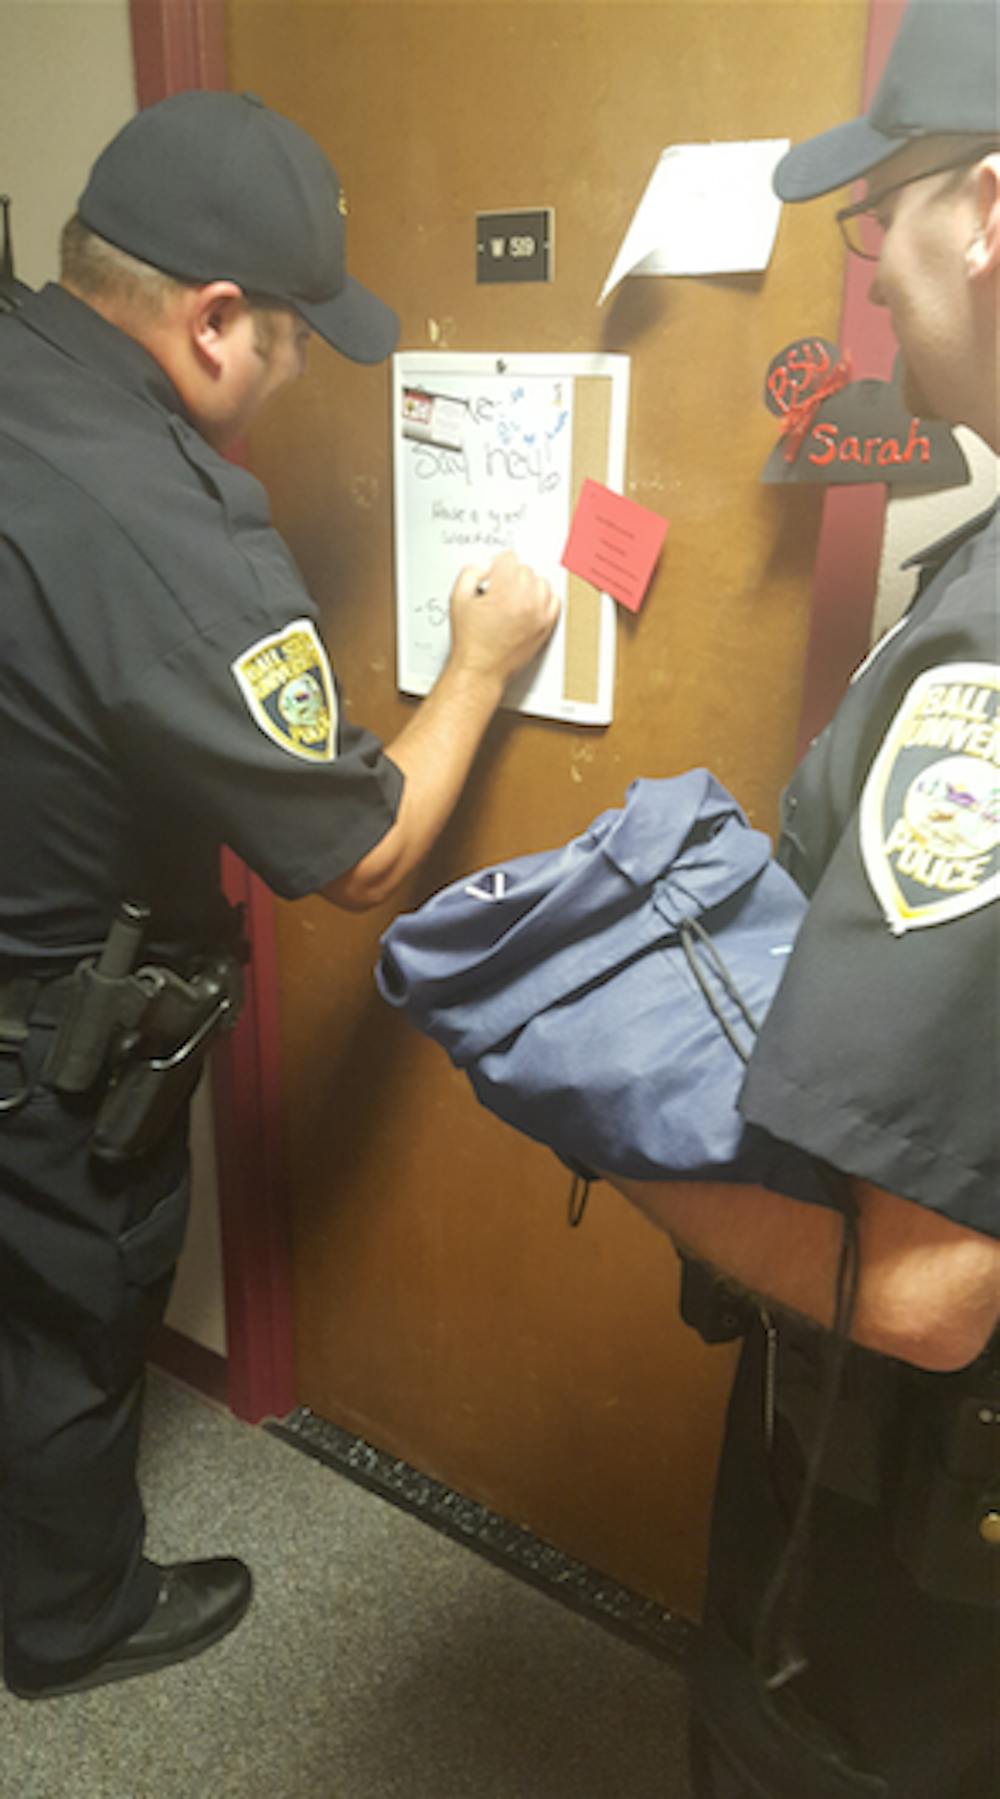 <p>University police officers have been assigned to each Ball State dorm to attend events, help students during move-in and address any of their needs. The aim of this program, according to UPD Chief James Duckham, is to build connections and feelings of trust with students.&nbsp;<em>Ren&nbsp;Rainey // Photo Provided</em></p>